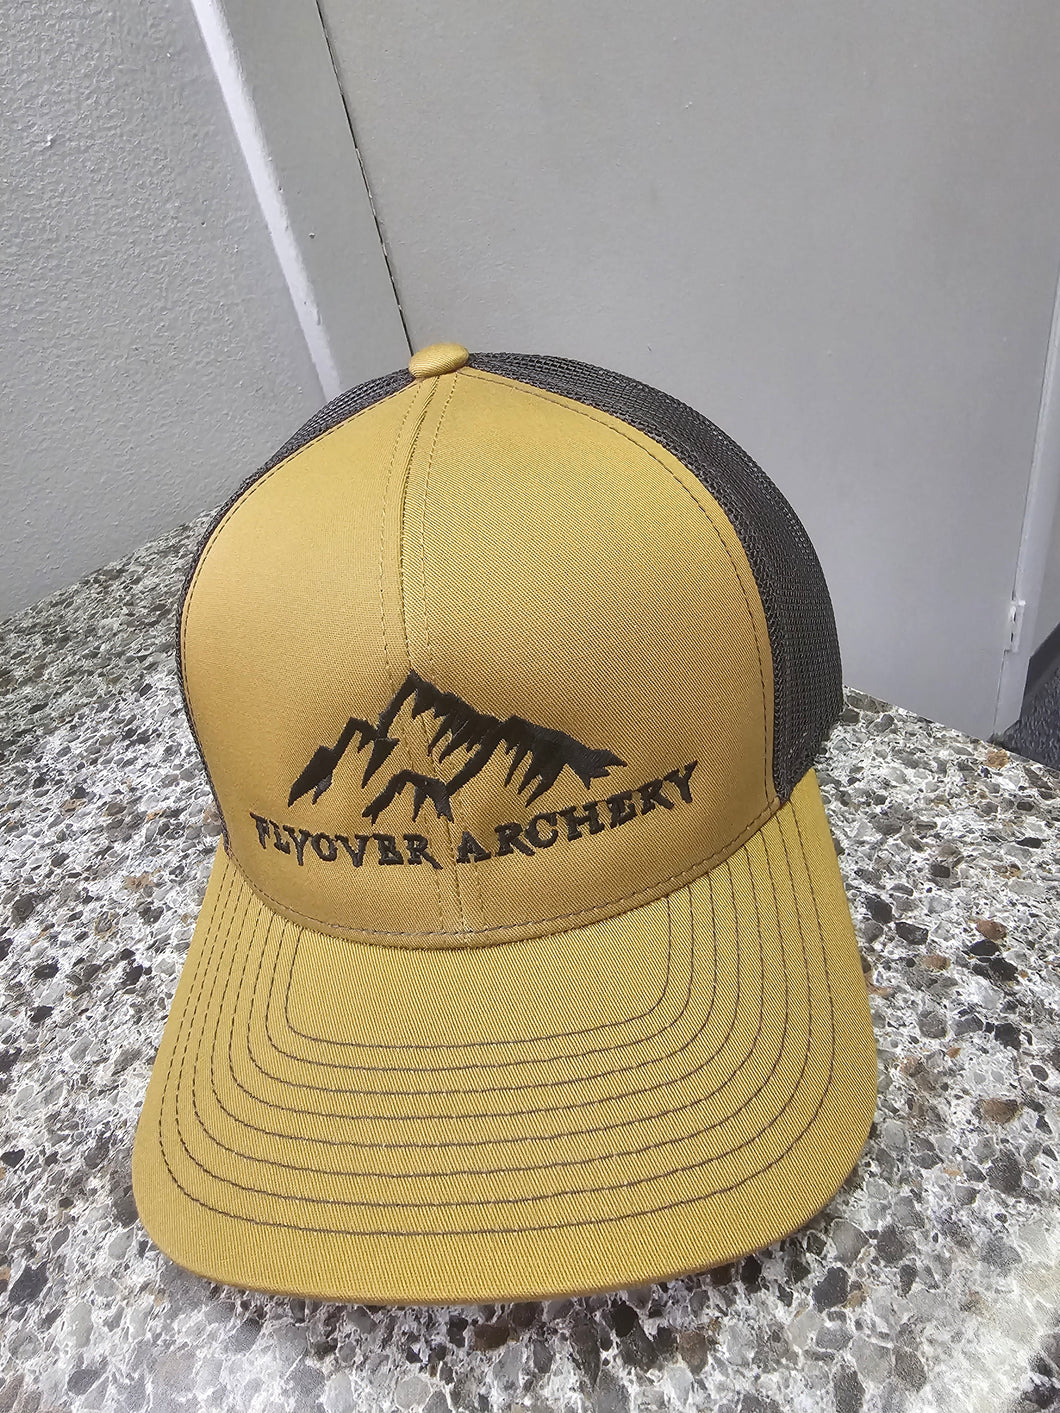 Flyover Archery hat in Bourbon with black logo.